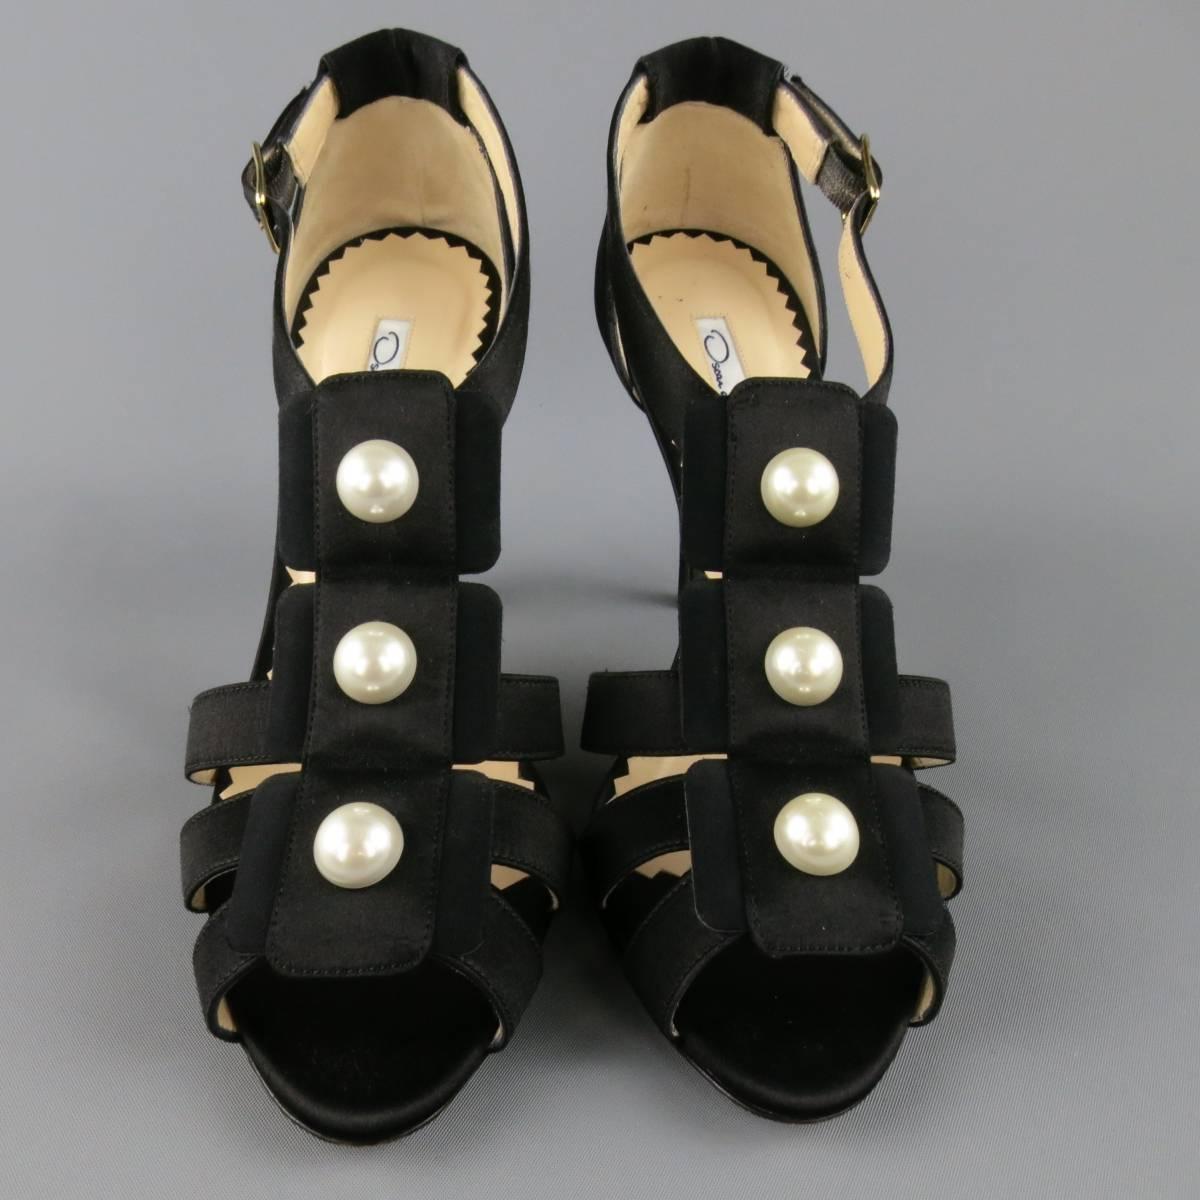 These gorgeous OSCAR DE LA RENTA sandals come in black silk satin and feature a gladiator style strap construction with oversized faux pearl details and covered stiletto heels. Made in Italy.
 
Excellent Pre-Owned Condition. Retails at